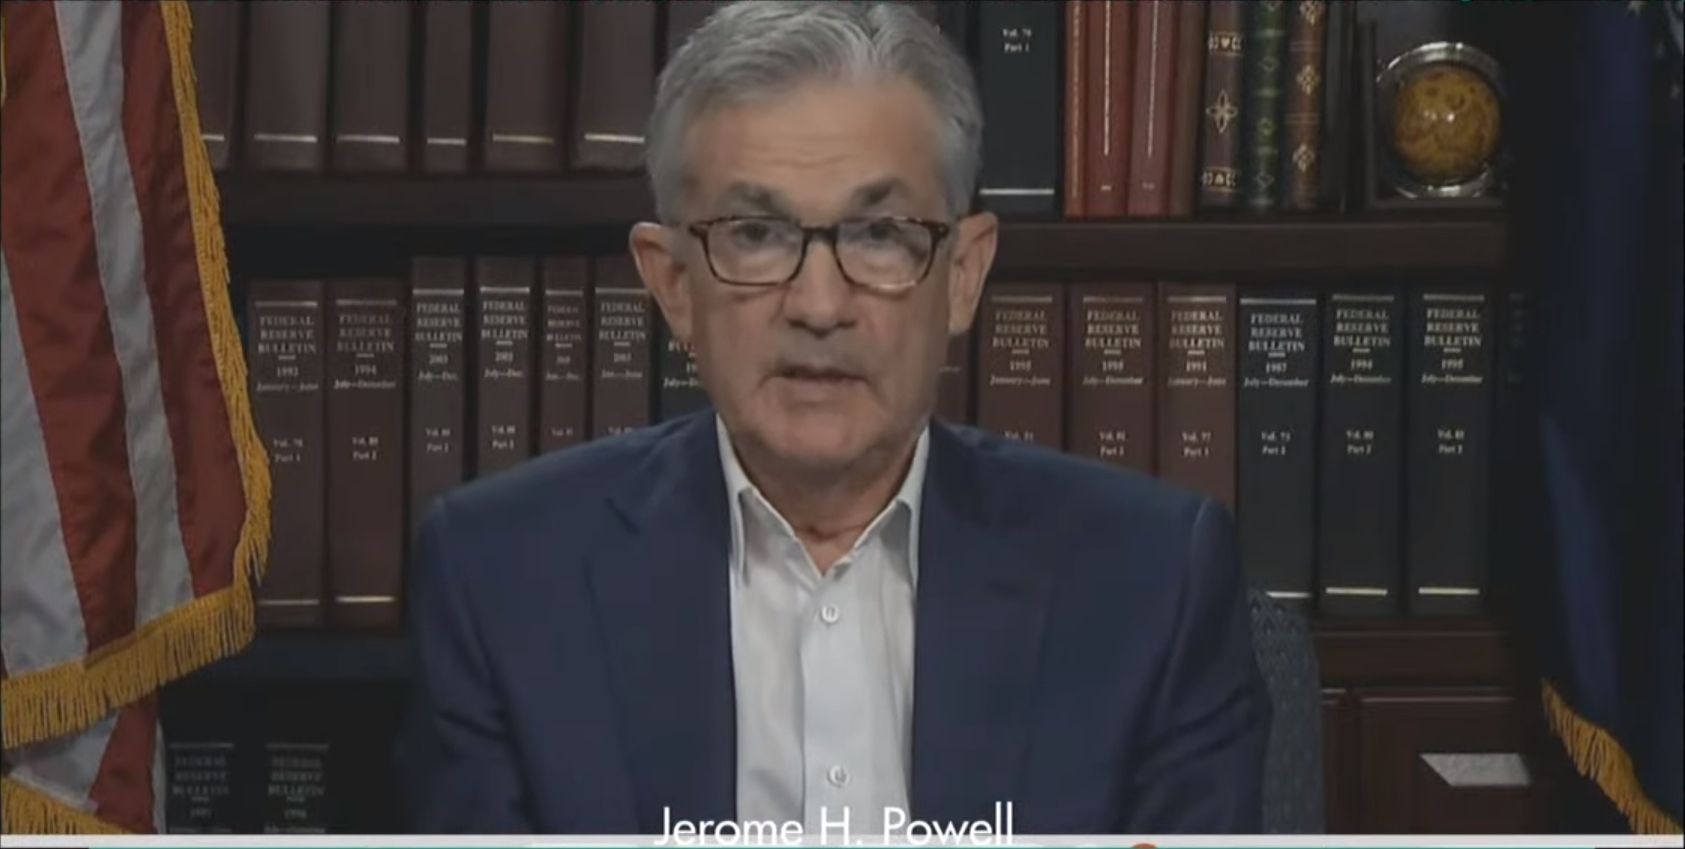 Frances Coppola: Mr. Powell, If You Need Increased Inflation, Give Folks Cash